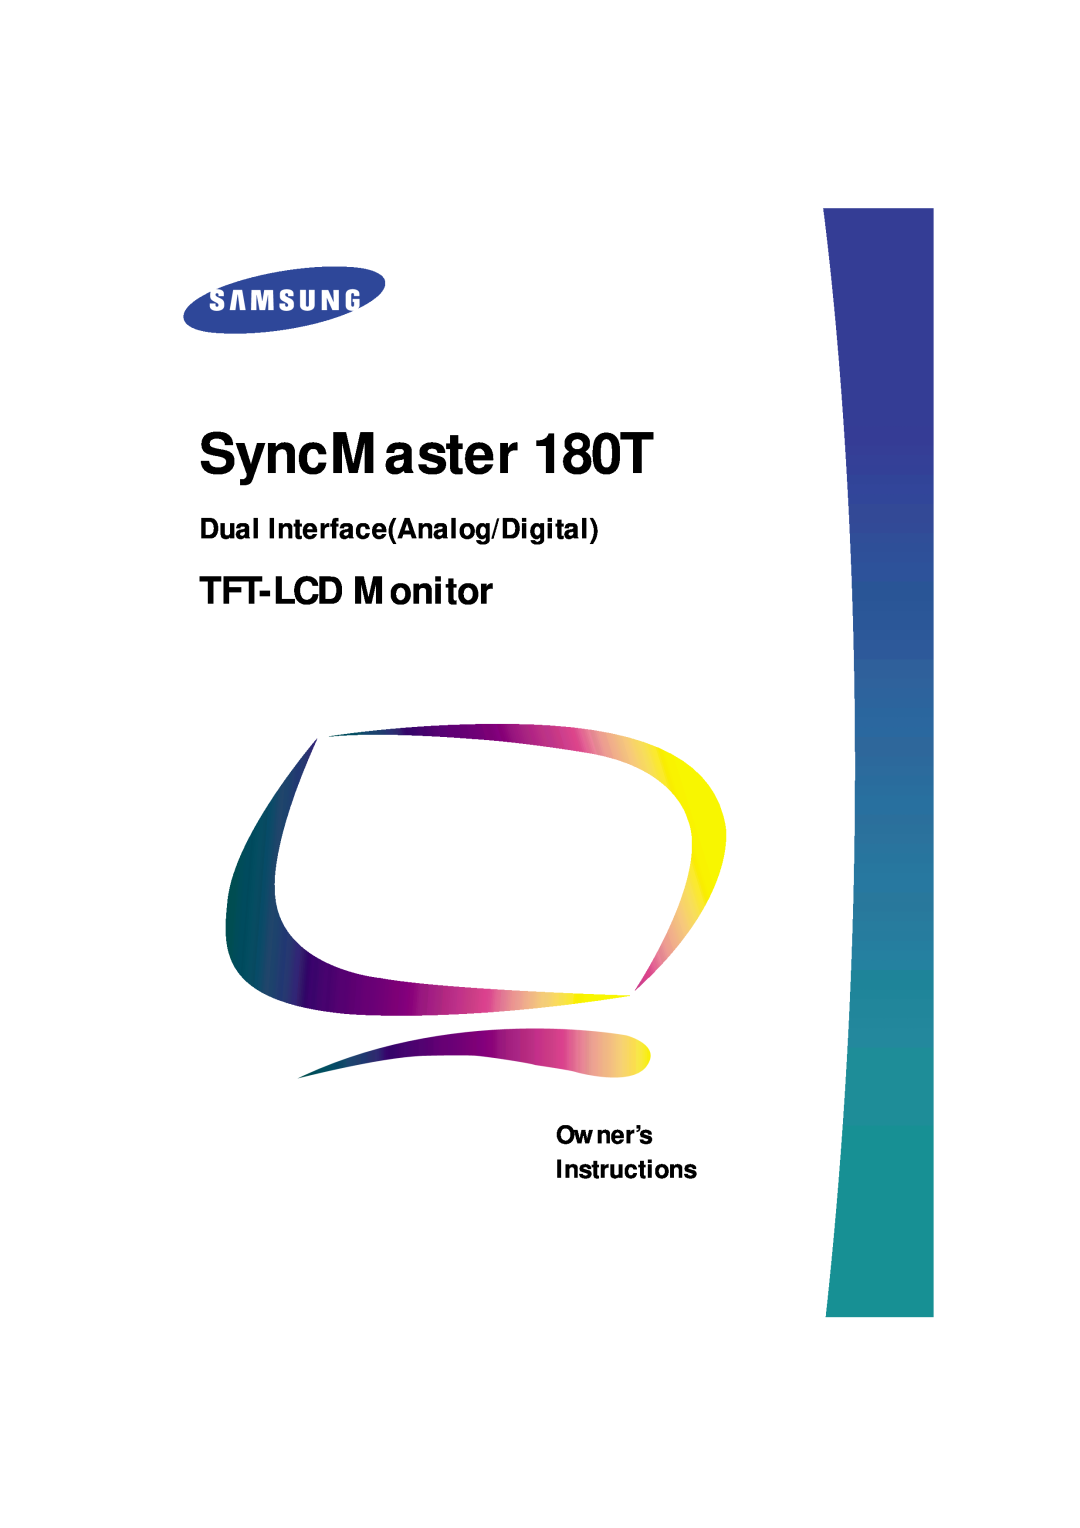 Samsung manual SyncMaster 180T, TFT-LCD Monitor, Dual InterfaceAnalog/Digital, Owner’s Instructions 